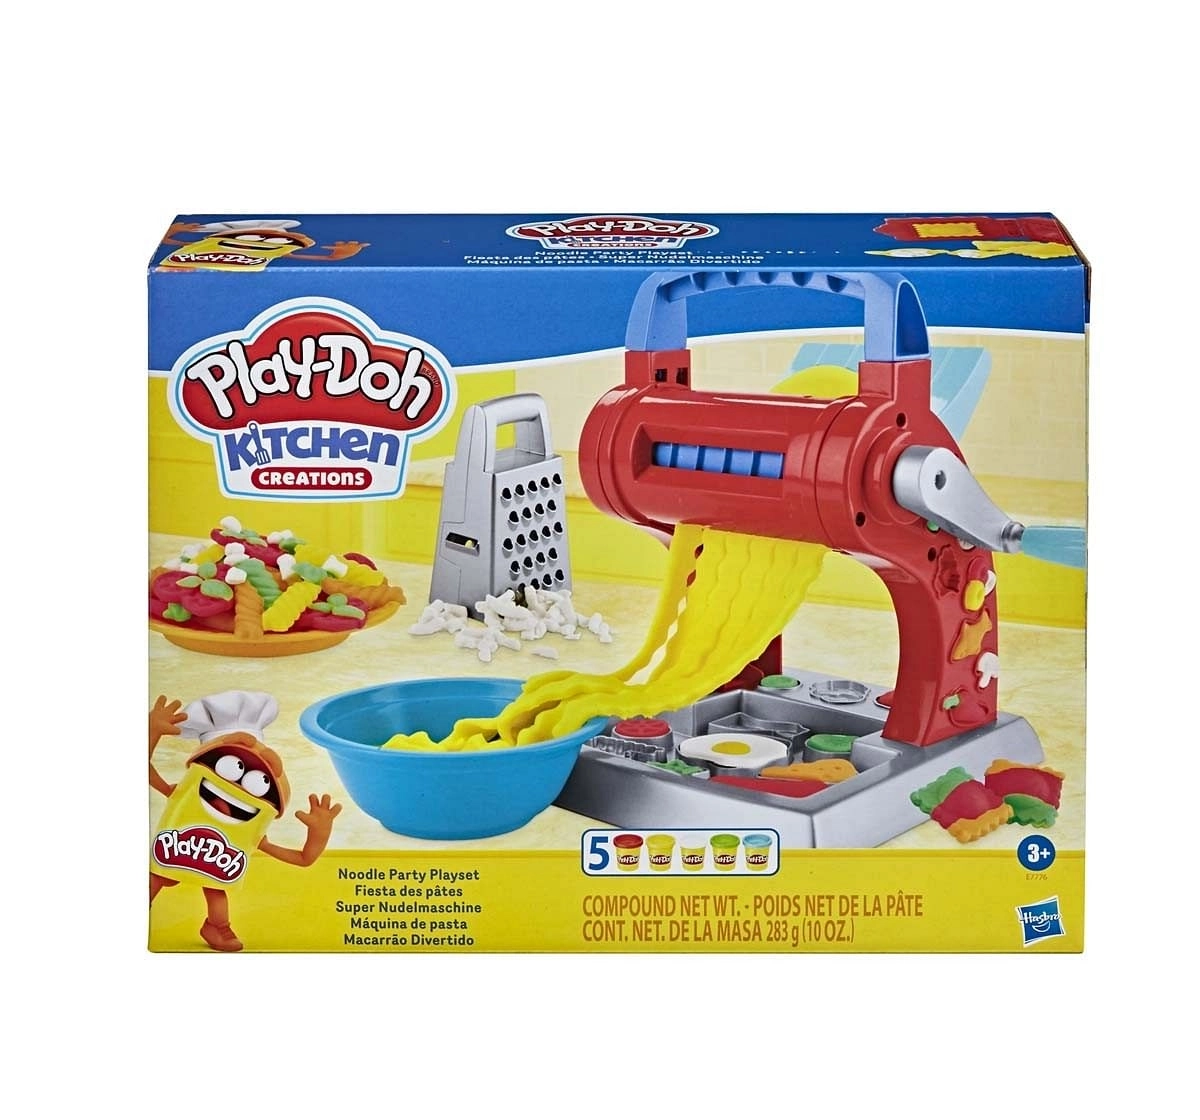 Play-Doh Kitchen Creations Noodle Party Playset for Kids 3 Years And Up With 5 Non-Toxic Play-Doh Colors Clay & Dough for Kids 